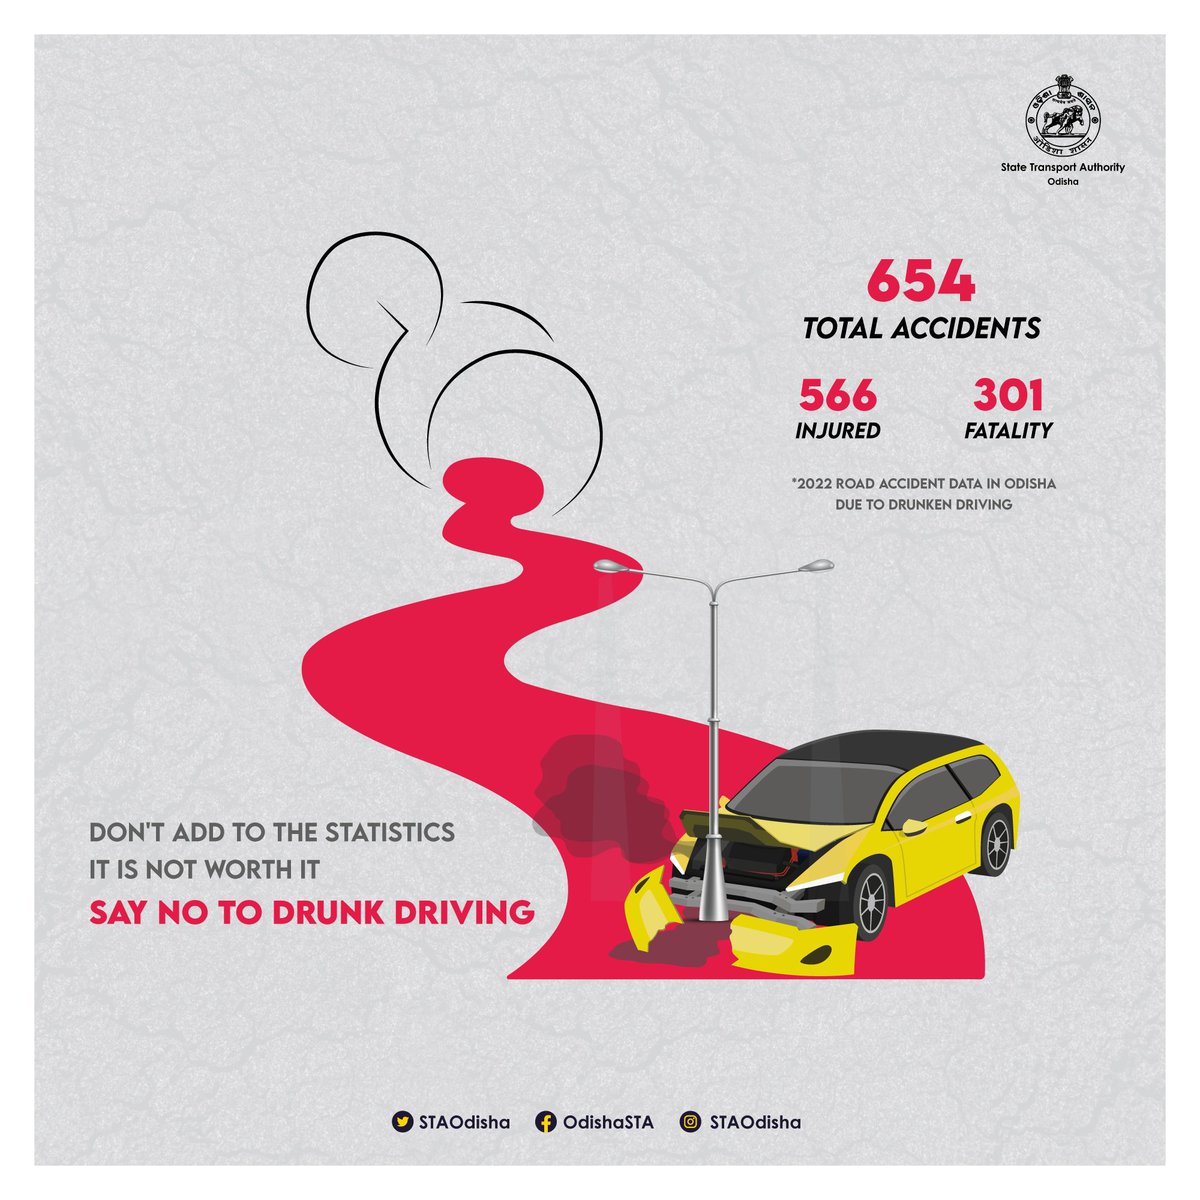 Do you know? Alcohol reduces the ability to see distant objects by 25%.

The problem with drunk driving is the mourning after. Do not mix drinking and driving.

#SayNoToDrunkDriving
#DontDrinkAndDrive
#Do_Not_Drink_And_Drive
#DriveResponsibly
#RoadSafety

@CTOdisha